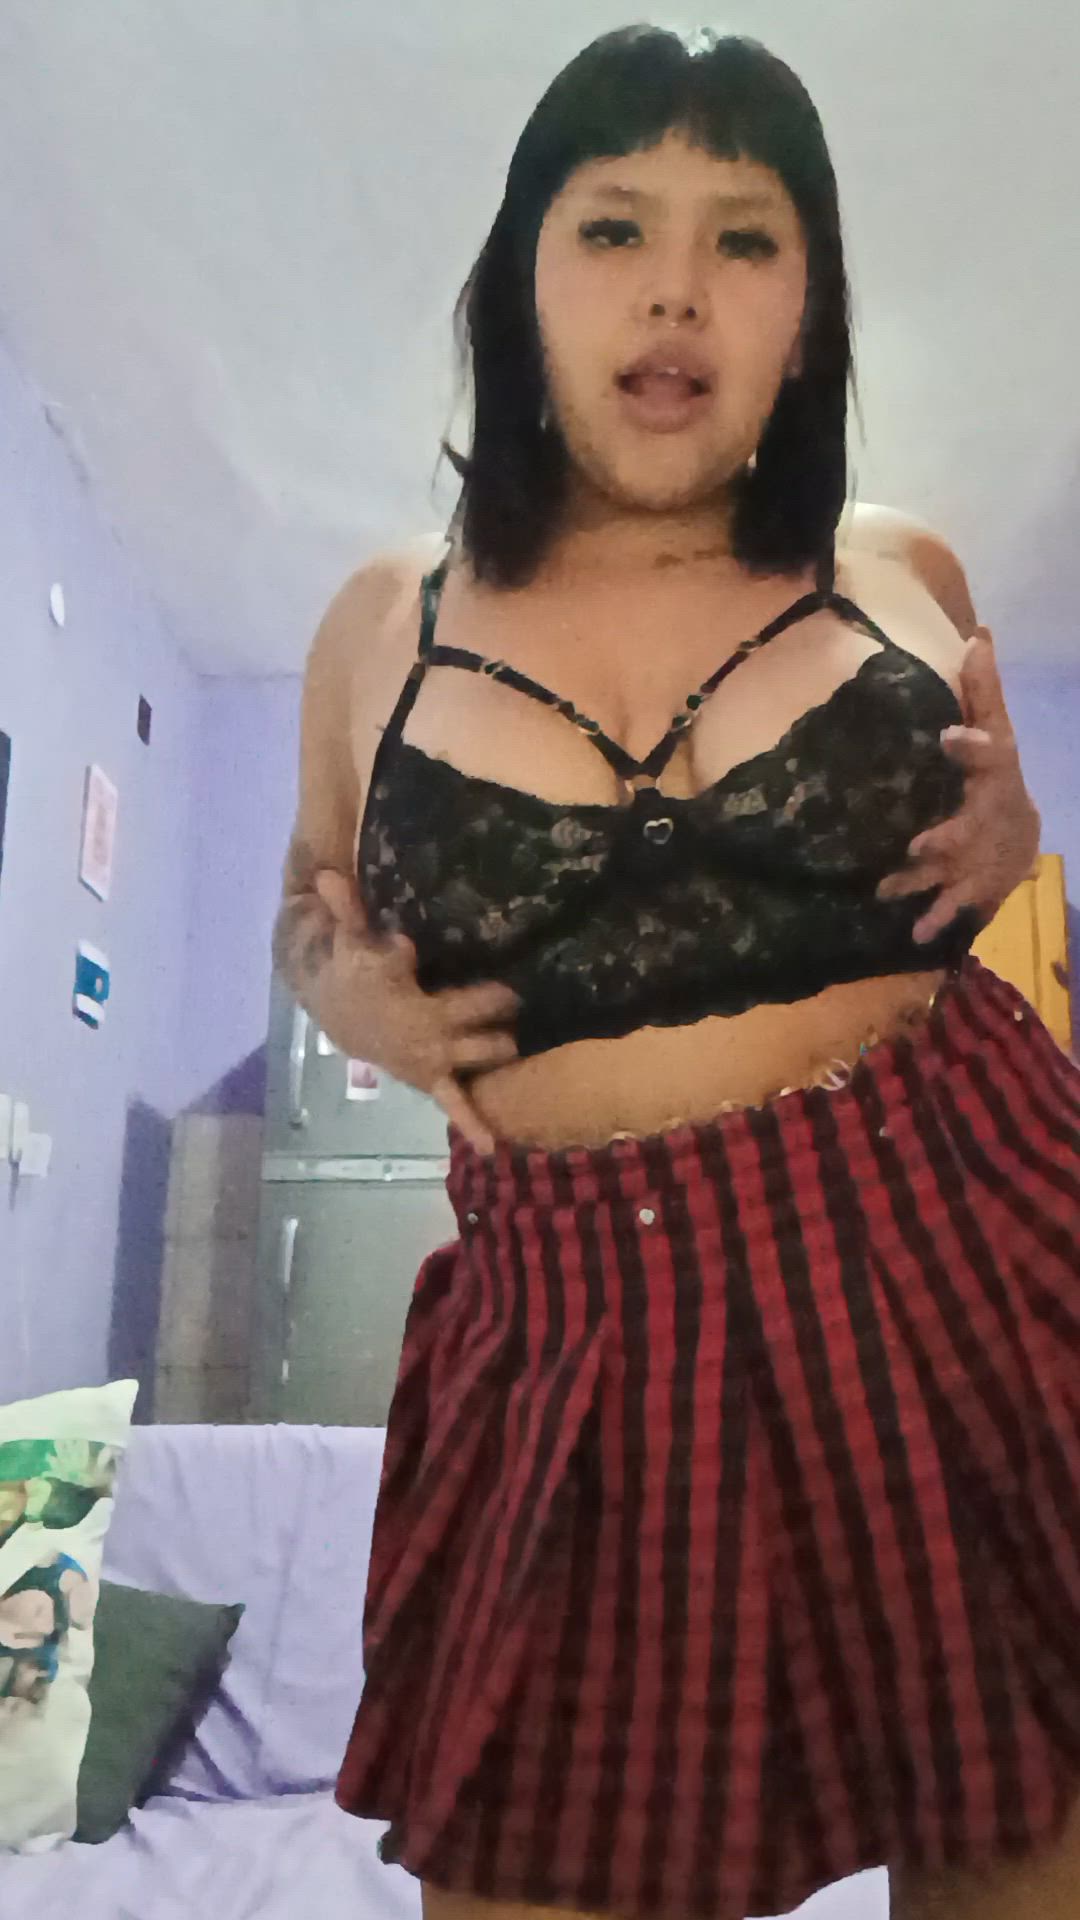 Big Tits porn video with onlyfans model babycurvy <strong>@akaripbel</strong>